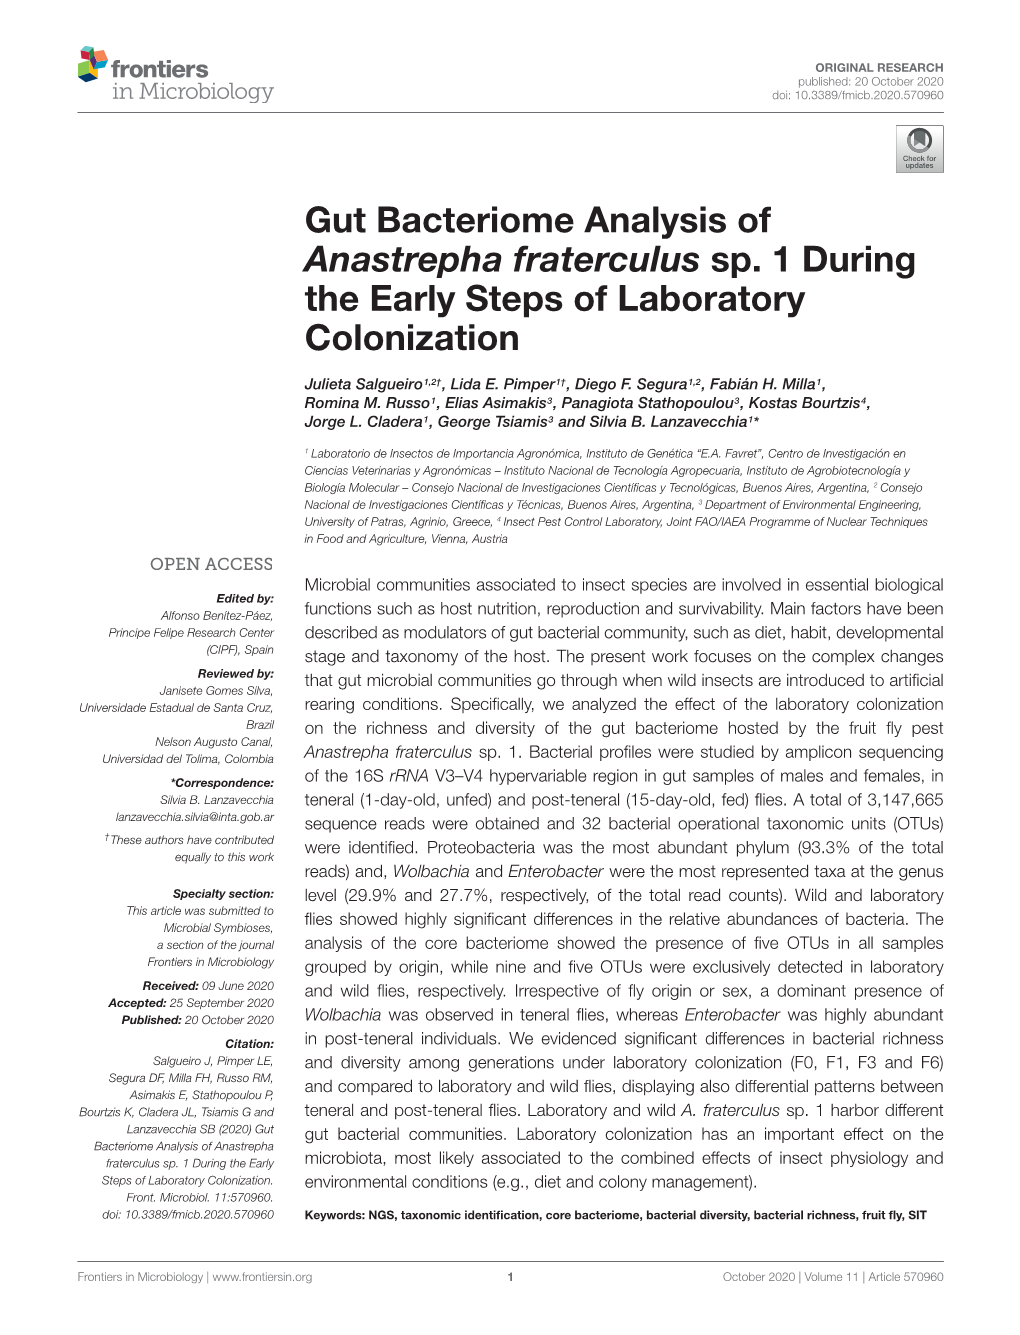 Gut Bacteriome Analysis of Anastrepha Fraterculus Sp. 1 During the Early Steps of Laboratory Colonization